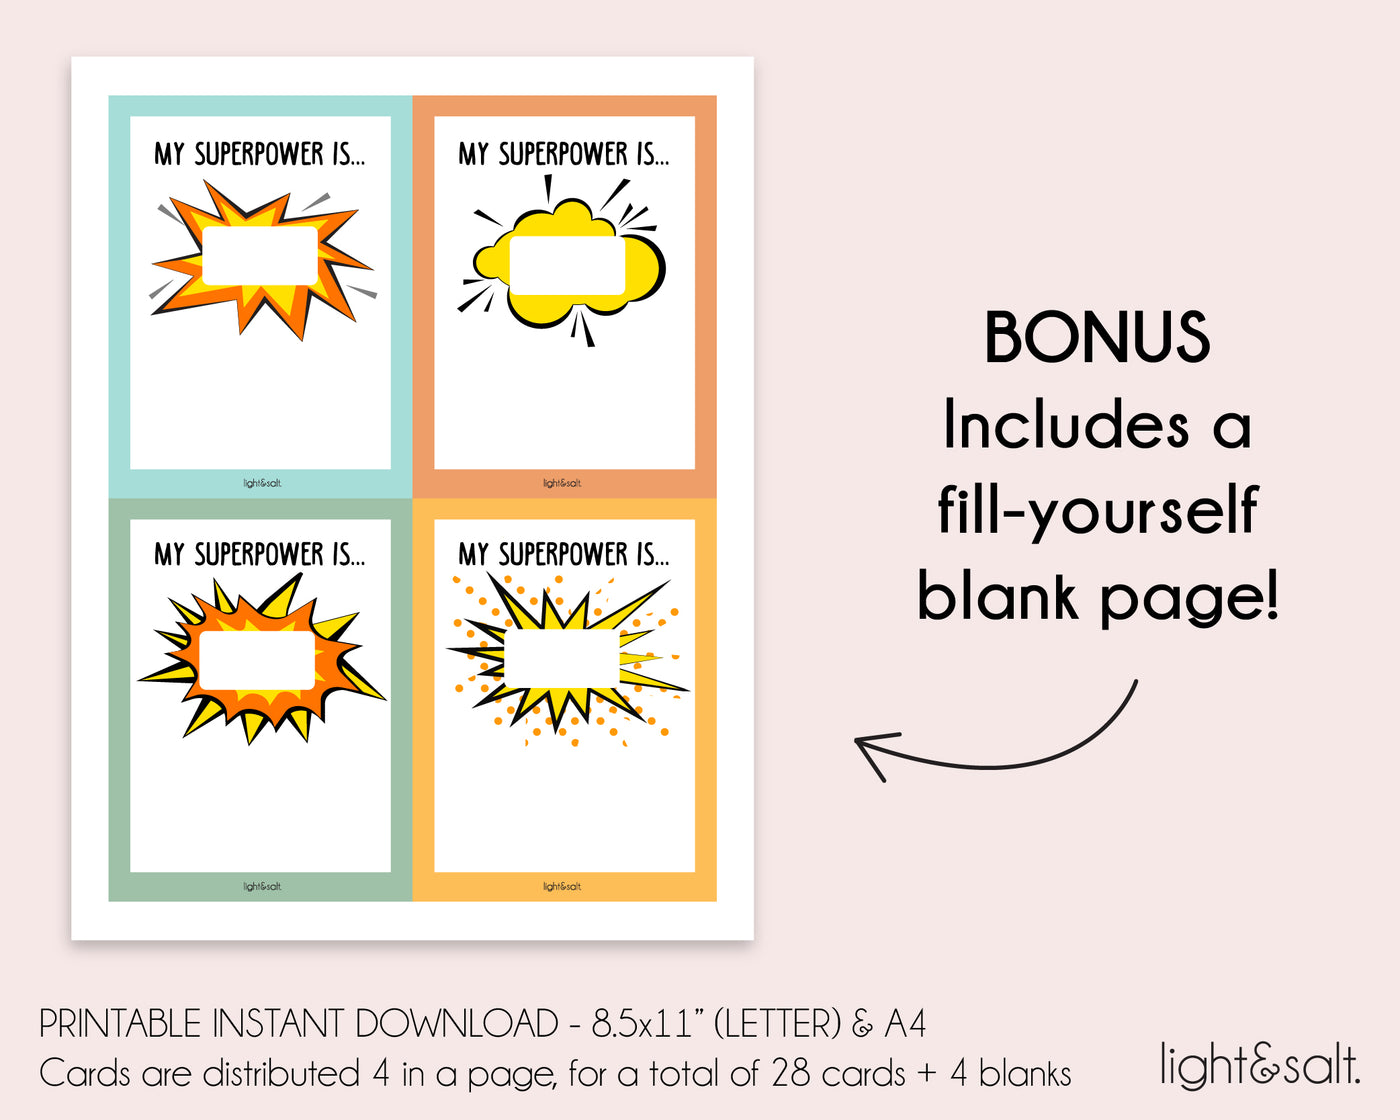 ADHD Superpower strength cards, executive functioning